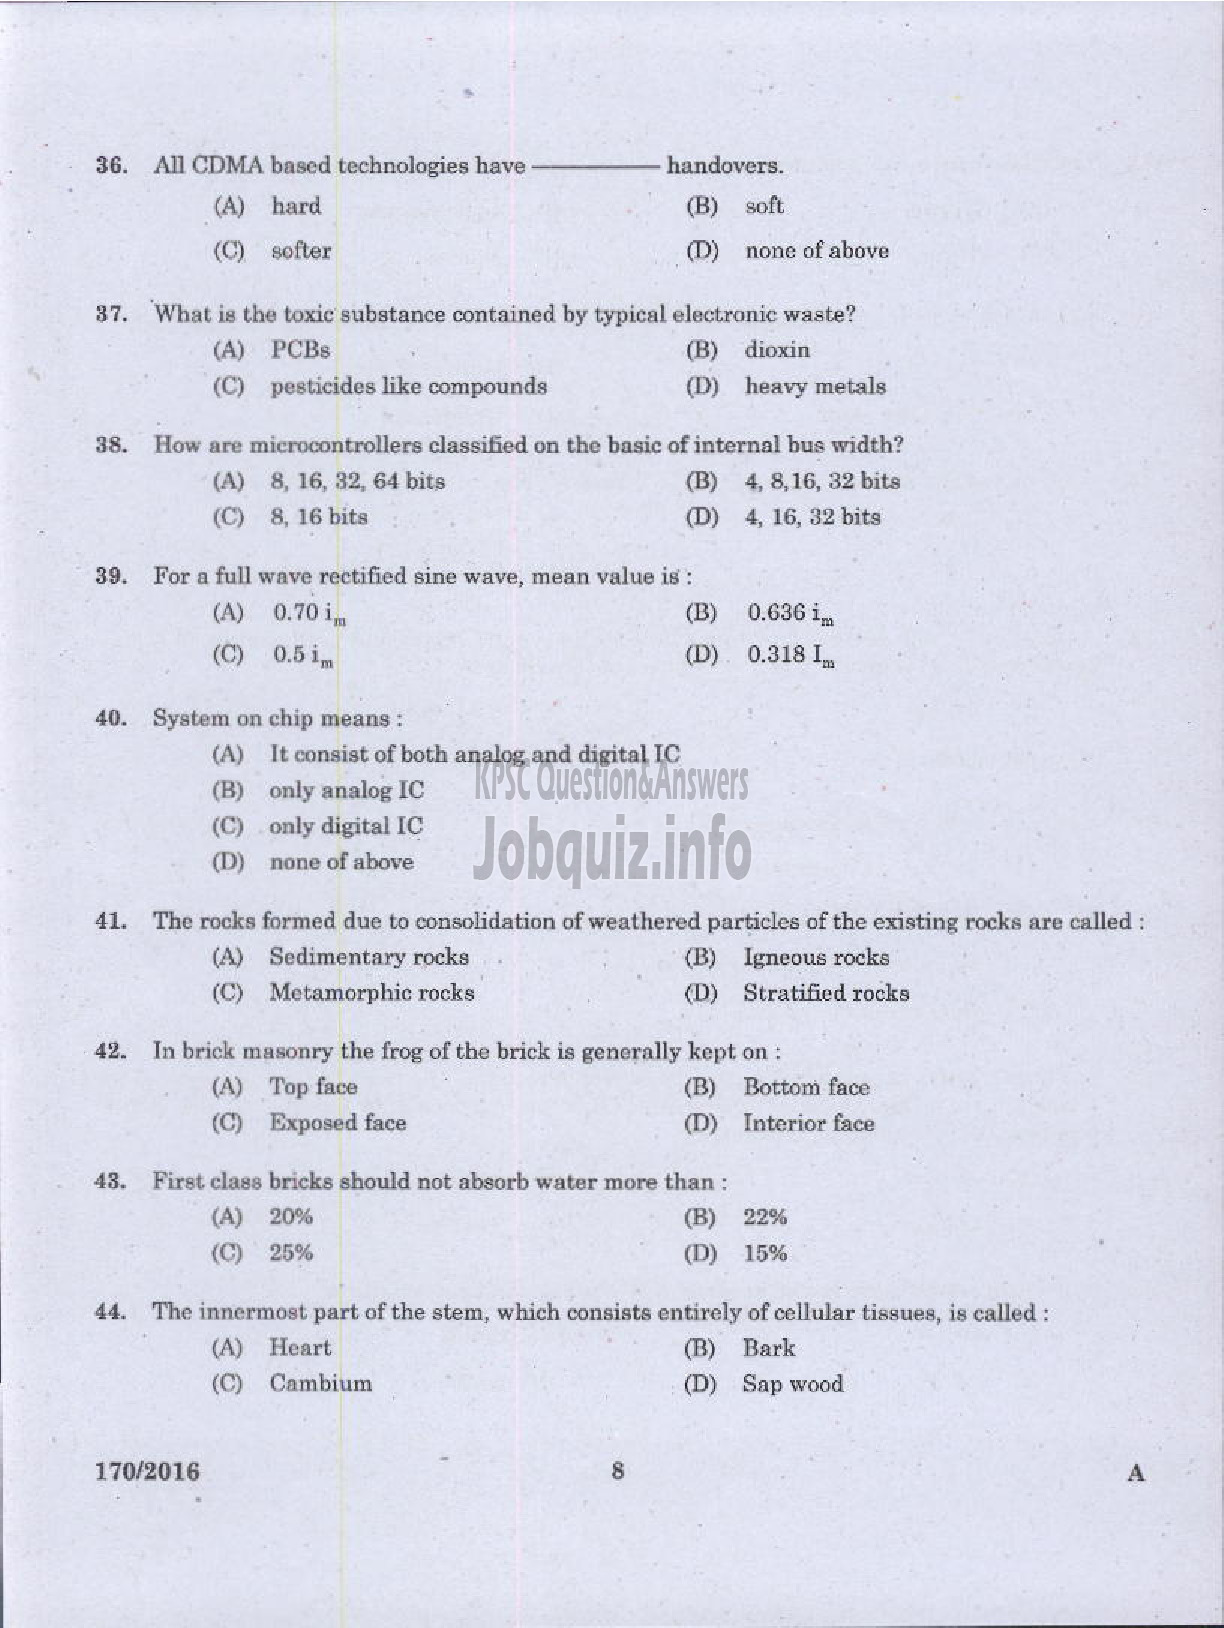 Kerala PSC Question Paper - LECTURER IN CIVIL ENGINEERING GOVT POLYTECHNICS TECHNICAL EDUCATION-6